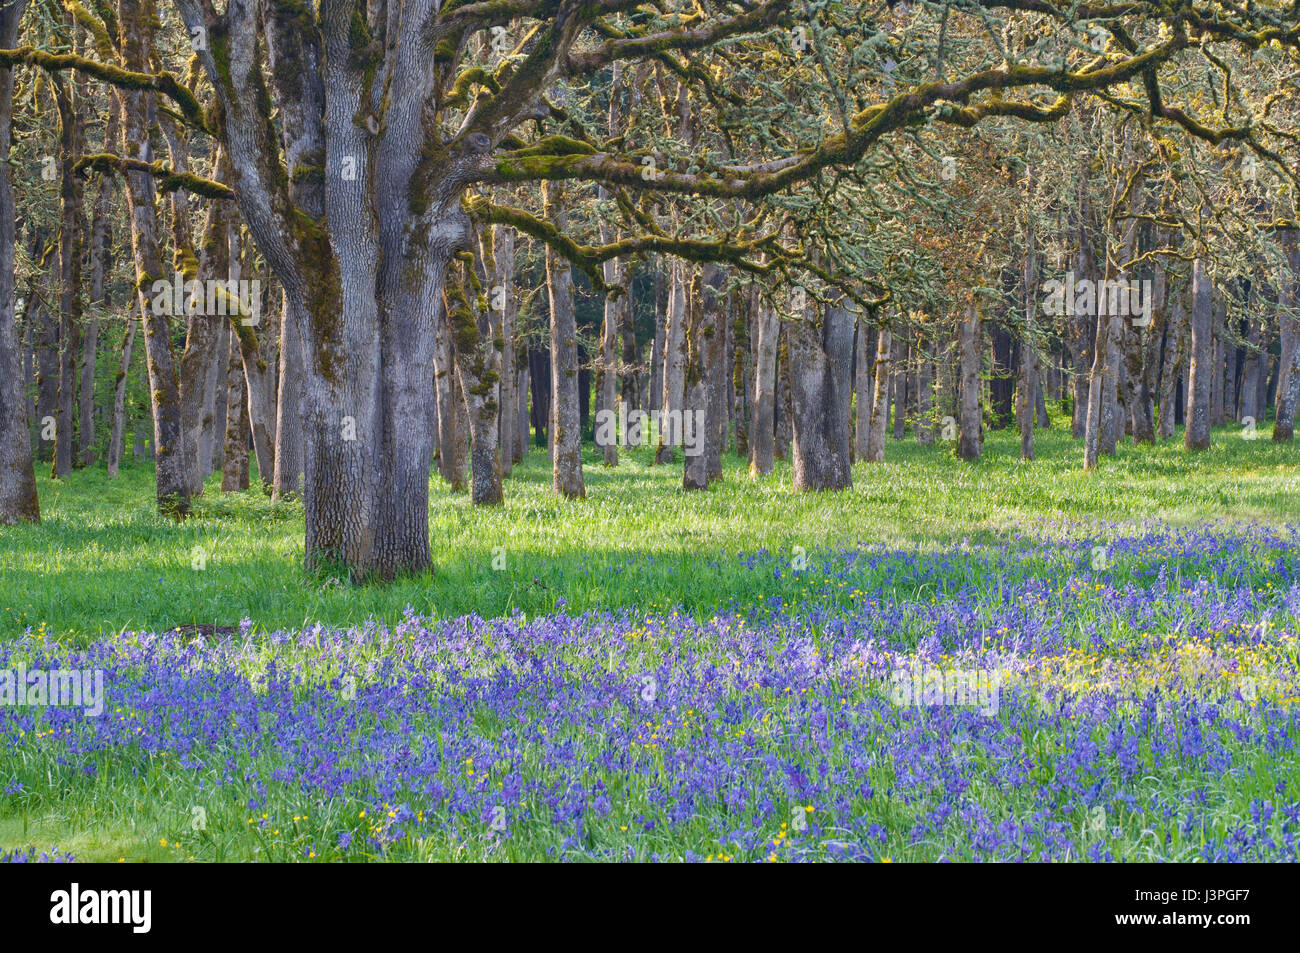 Forest of old oak trees with meadow of blooming blue camas wildflowers Stock Photo